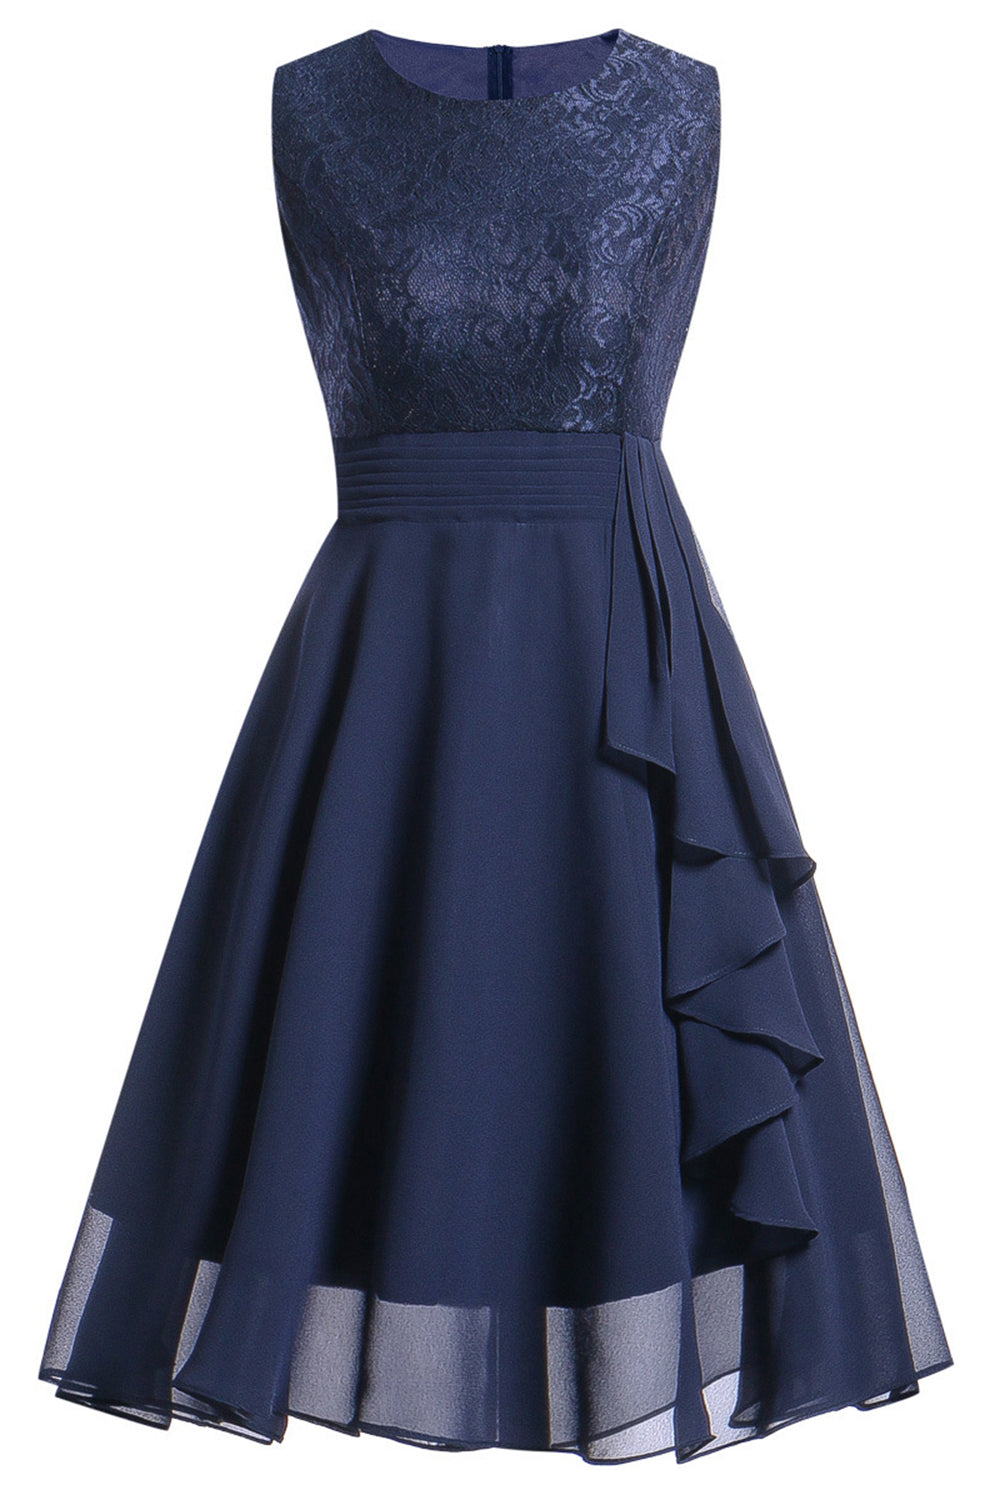 Navy Lace Wedding Party Dress with Ruffles